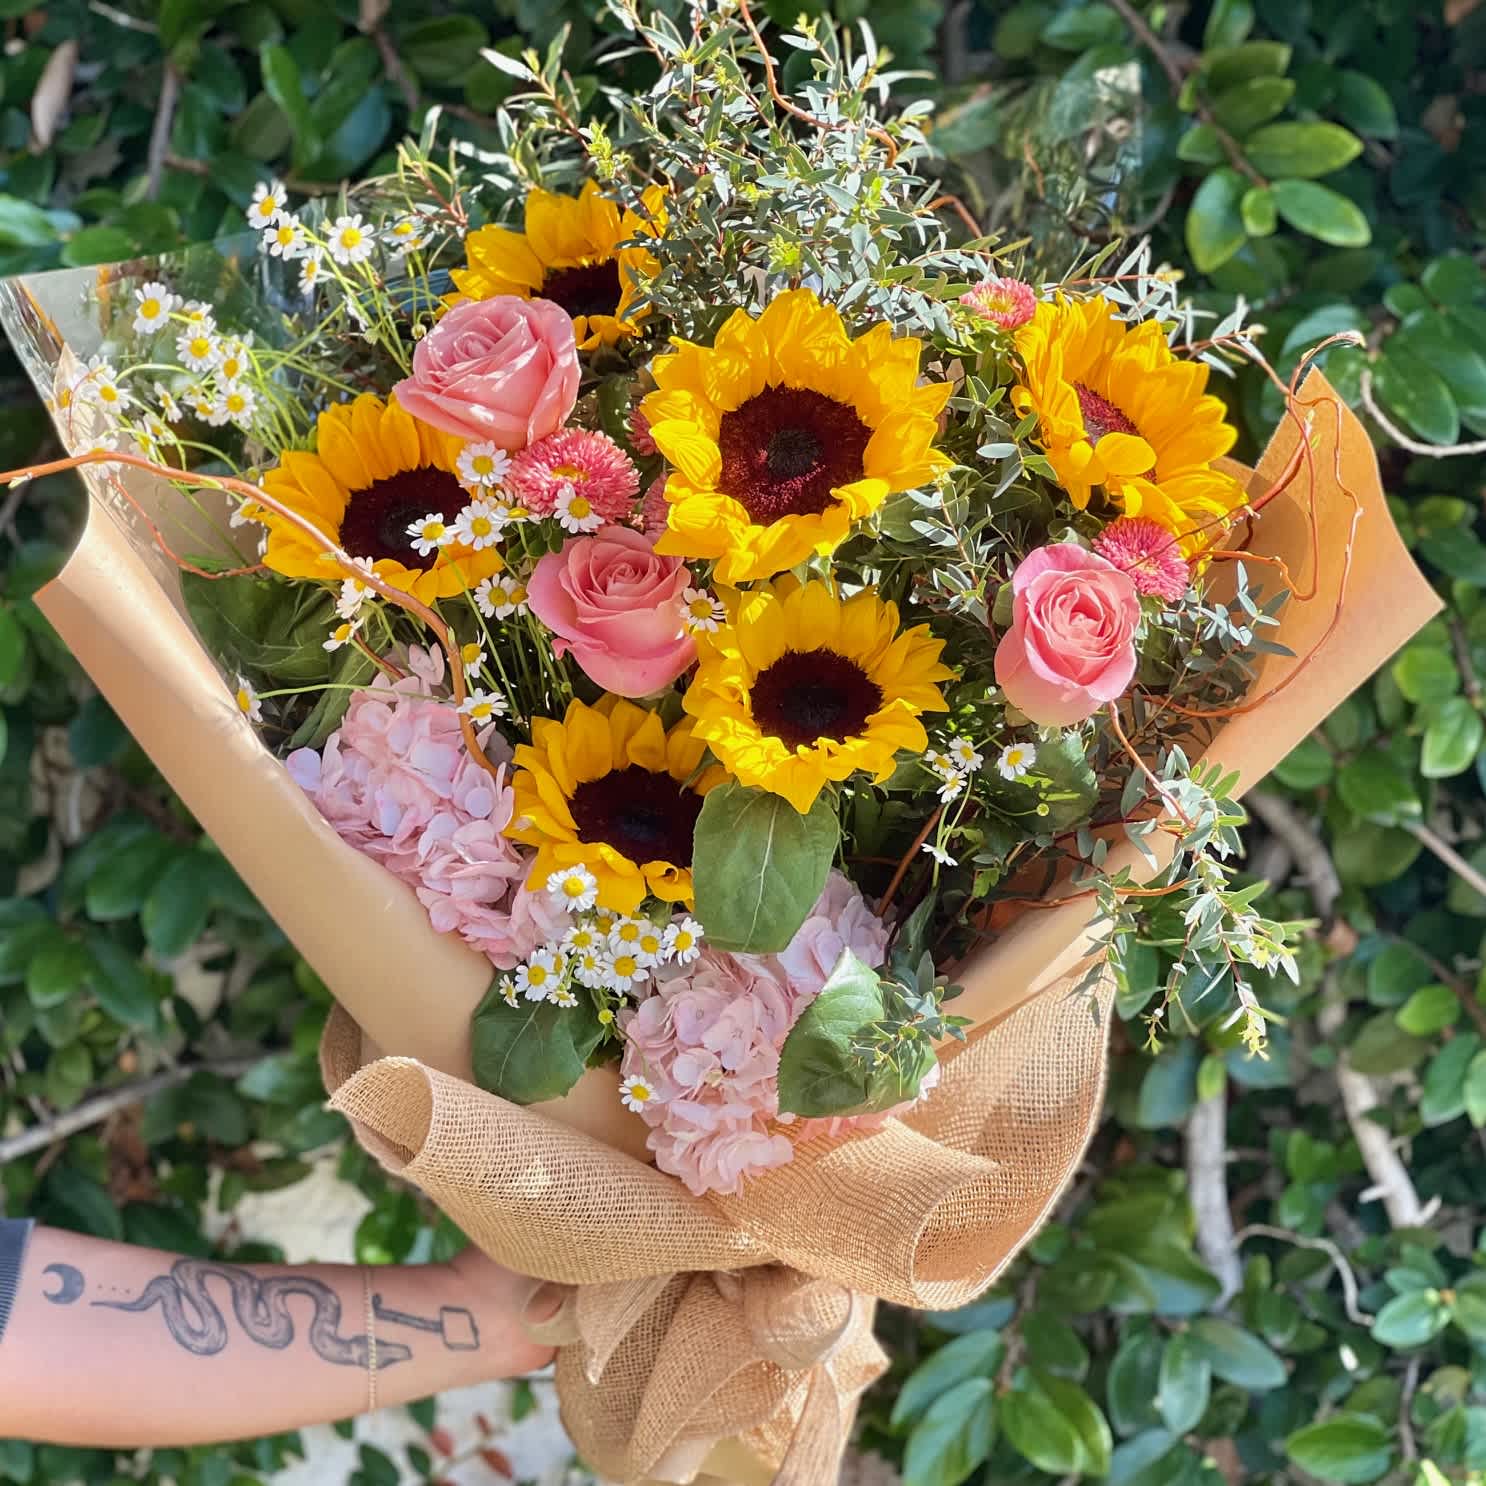 Sunflower Sunshine Bouquet - This radiant bouquet features a stunning mix of sunflowers, chamomile, pink roses, pink hydrangeas, peach Matsumoto flowers and more in a rustic burlap. Perfect for gifting a burst of sunshine!  NOTE: This bouquet DOES NOT include water tubes or a vase. It is wrapped with cellophane and brown paper and needs to be placed in water immediately after receiving.